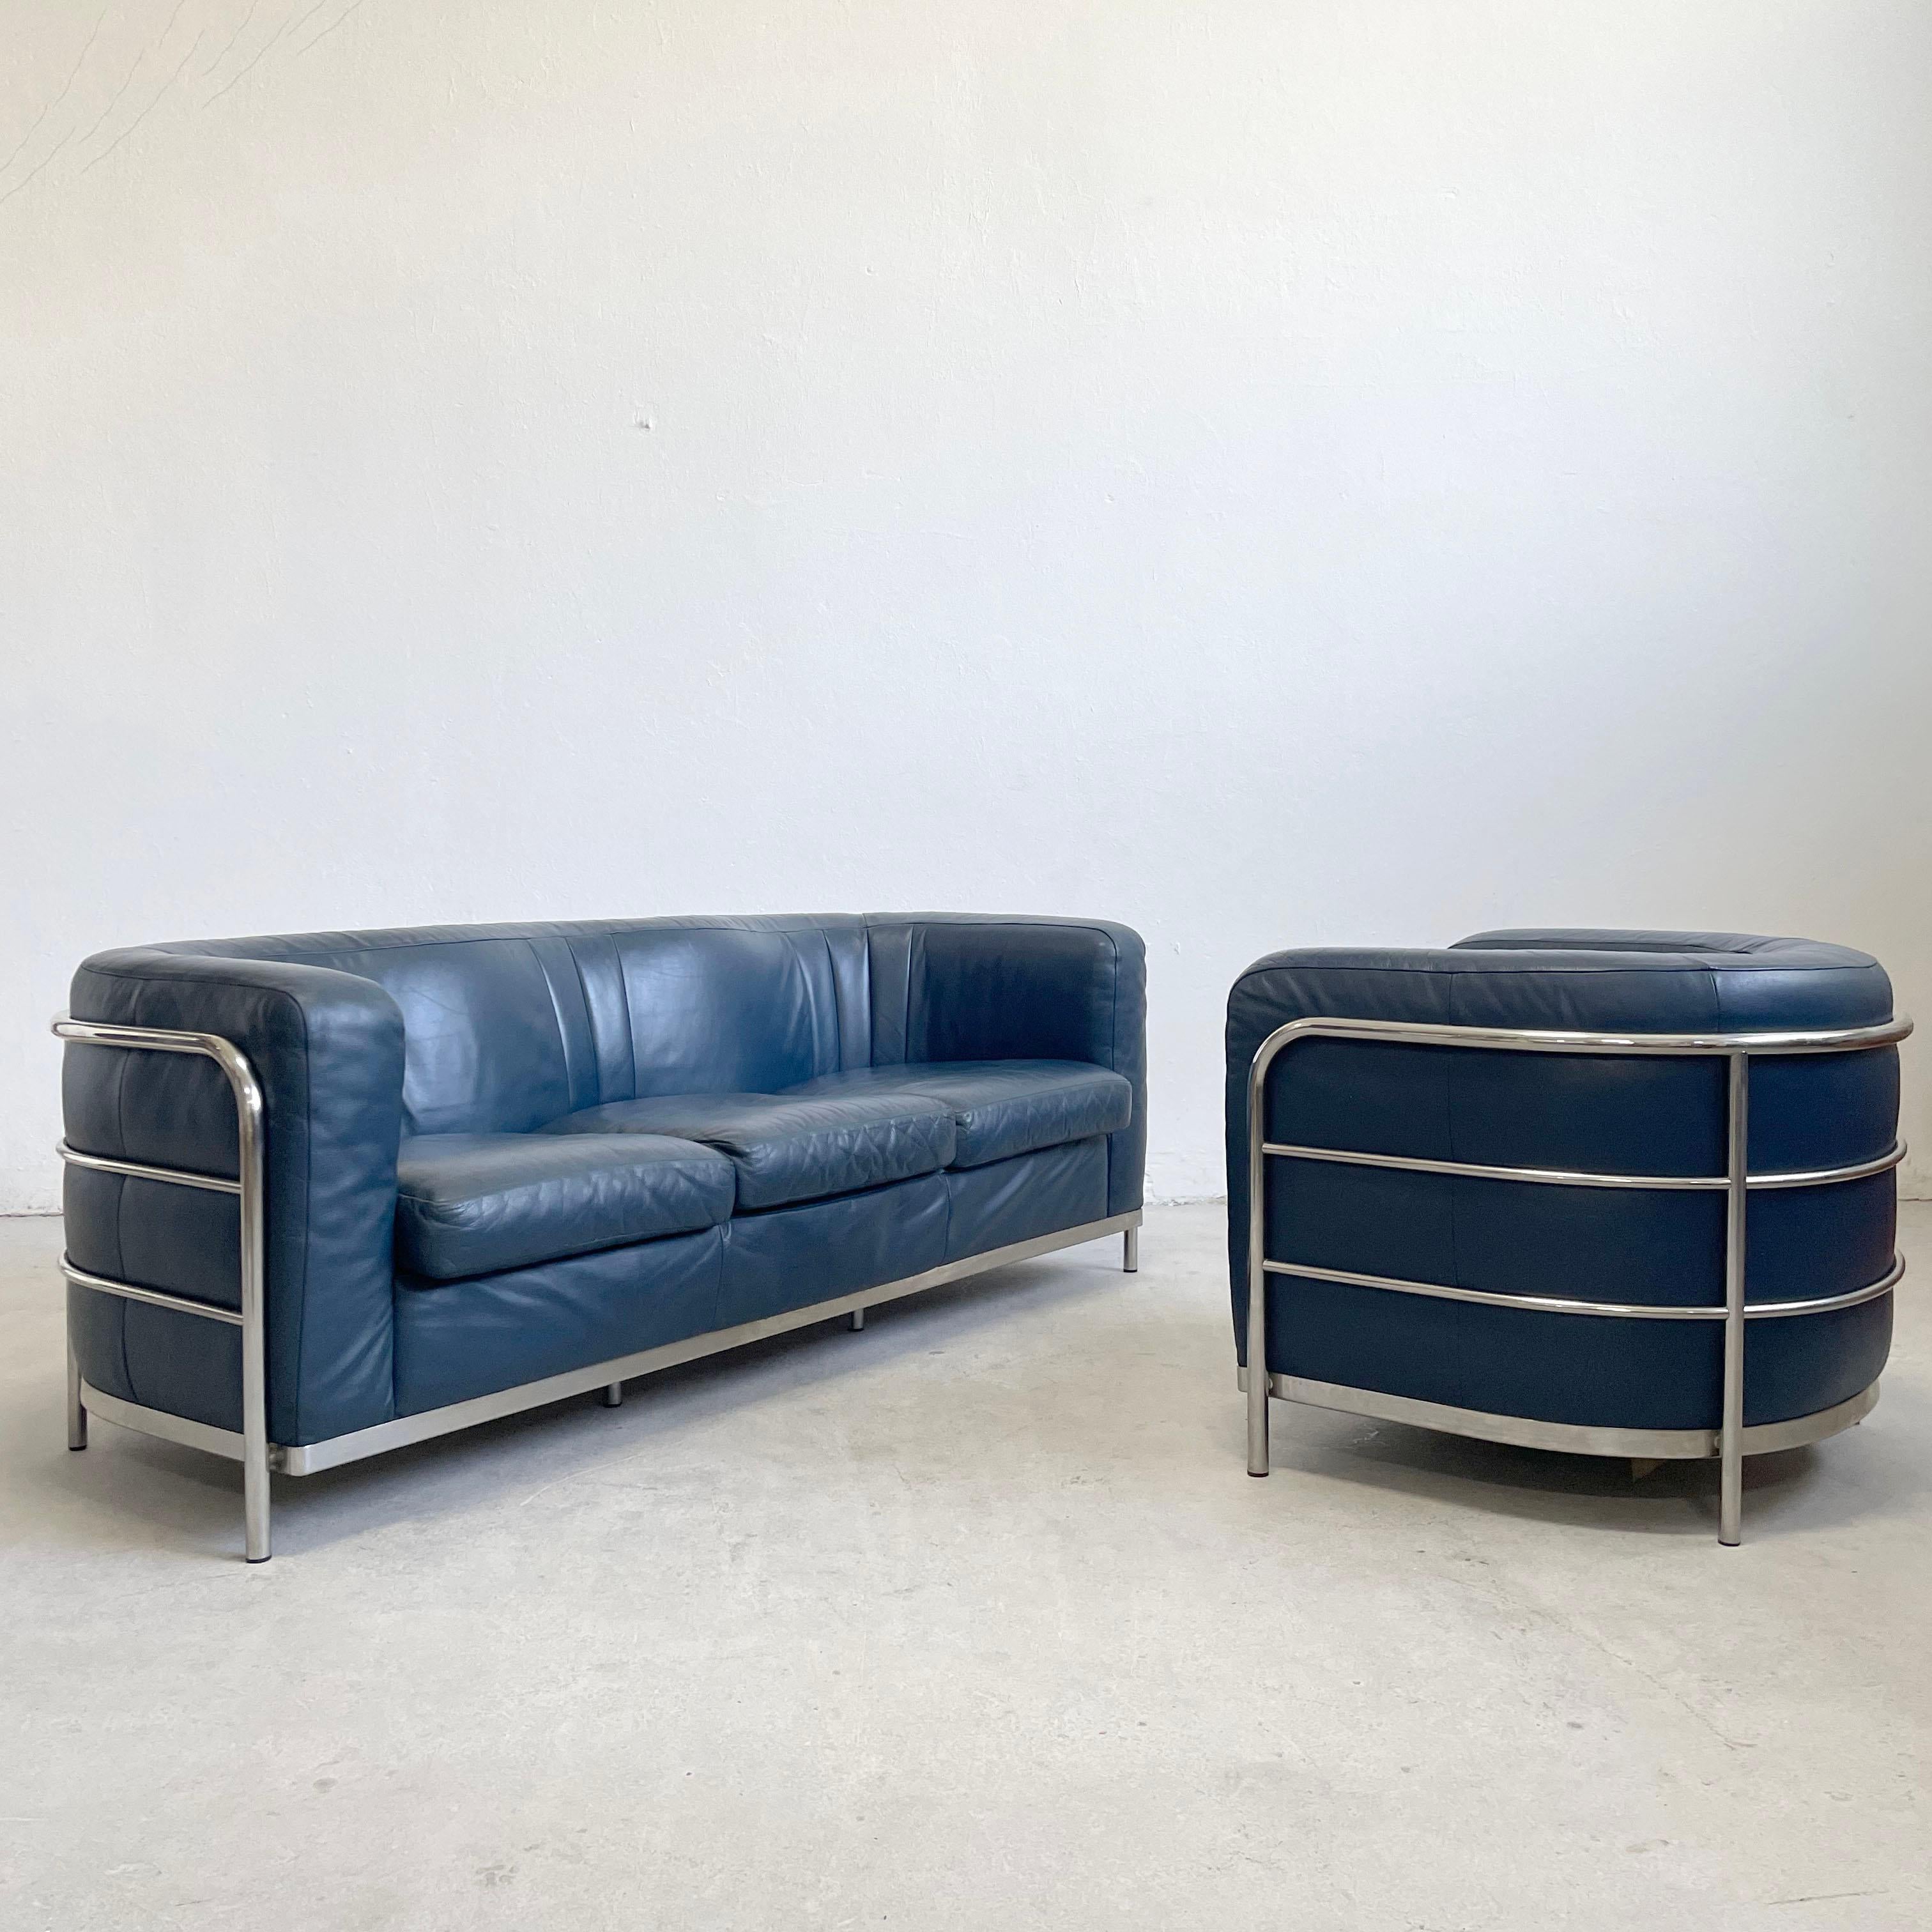 De Pas, D’Urbino and Lomazzi for Zanotta, living room set consisting of a sofa and an armchair, model 'Onda', blue leather, chrome, Italy, 1985

Rounded and curved ‘Onda’ sofa by Jonathan de Pas, Donato D'urbino and Paolo Lomazzi. The piece was